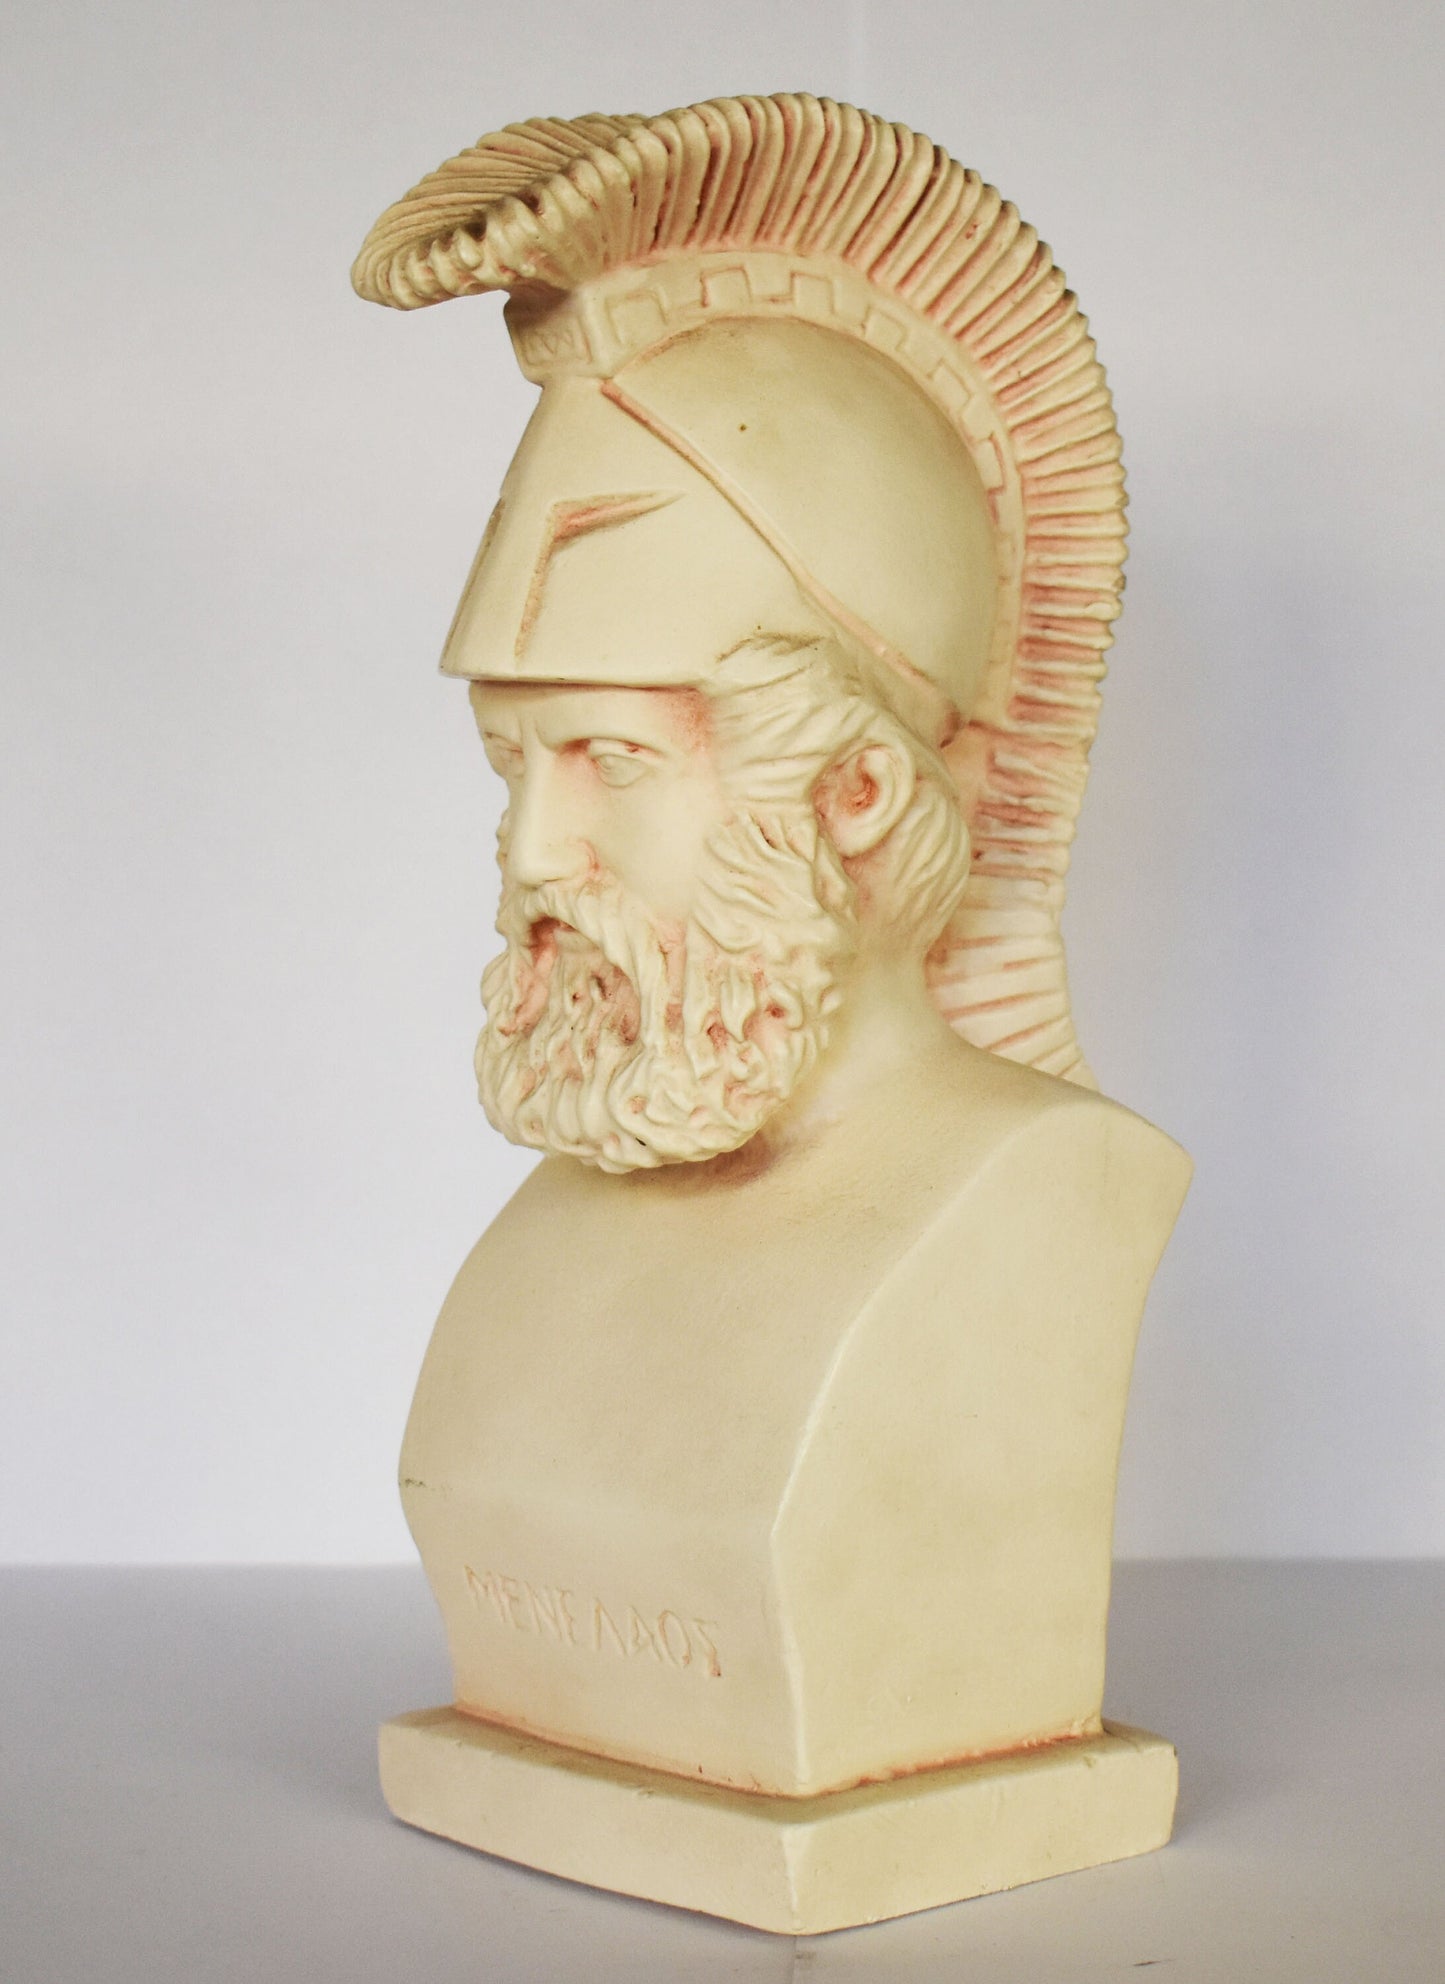 Menelaus - King of Sparta  - Husband of Helen - Brother of Agamemnon - Trojan War - Homer's Iliad - Museum Reproduction - Head Bust